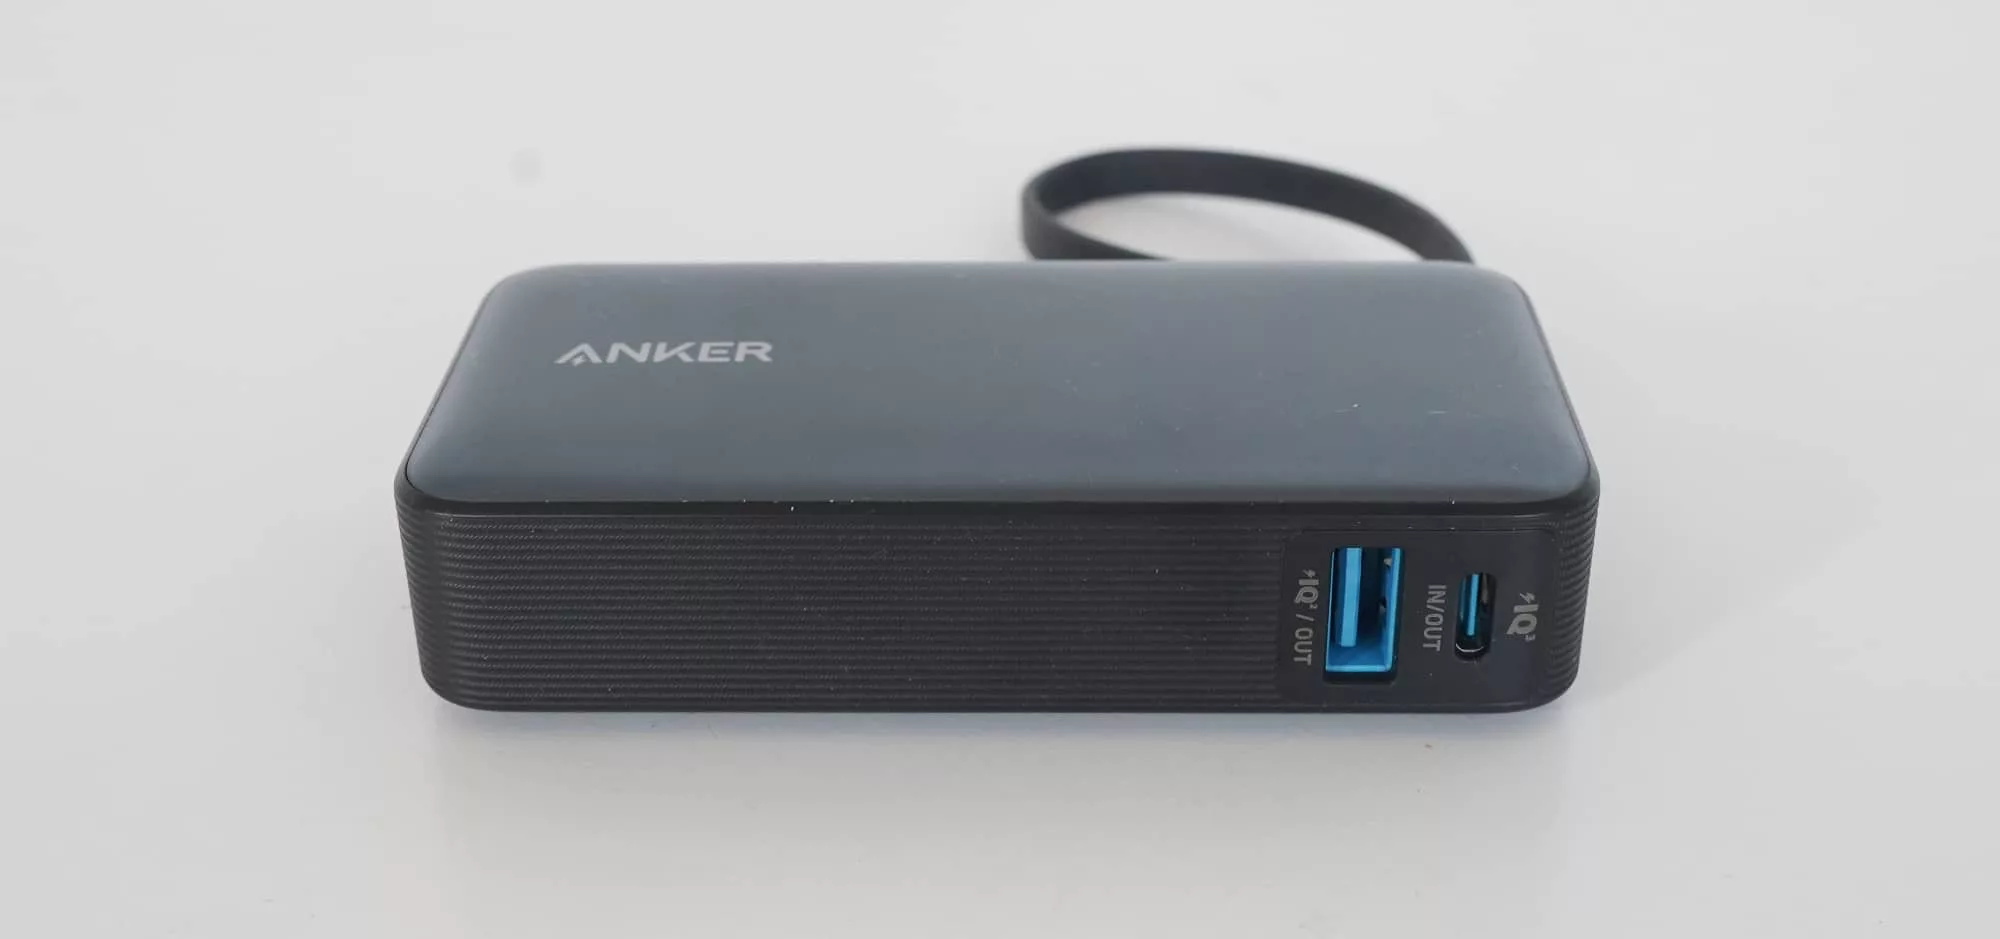 Anker Powercore Fusion 5000 review: It's all you need, really